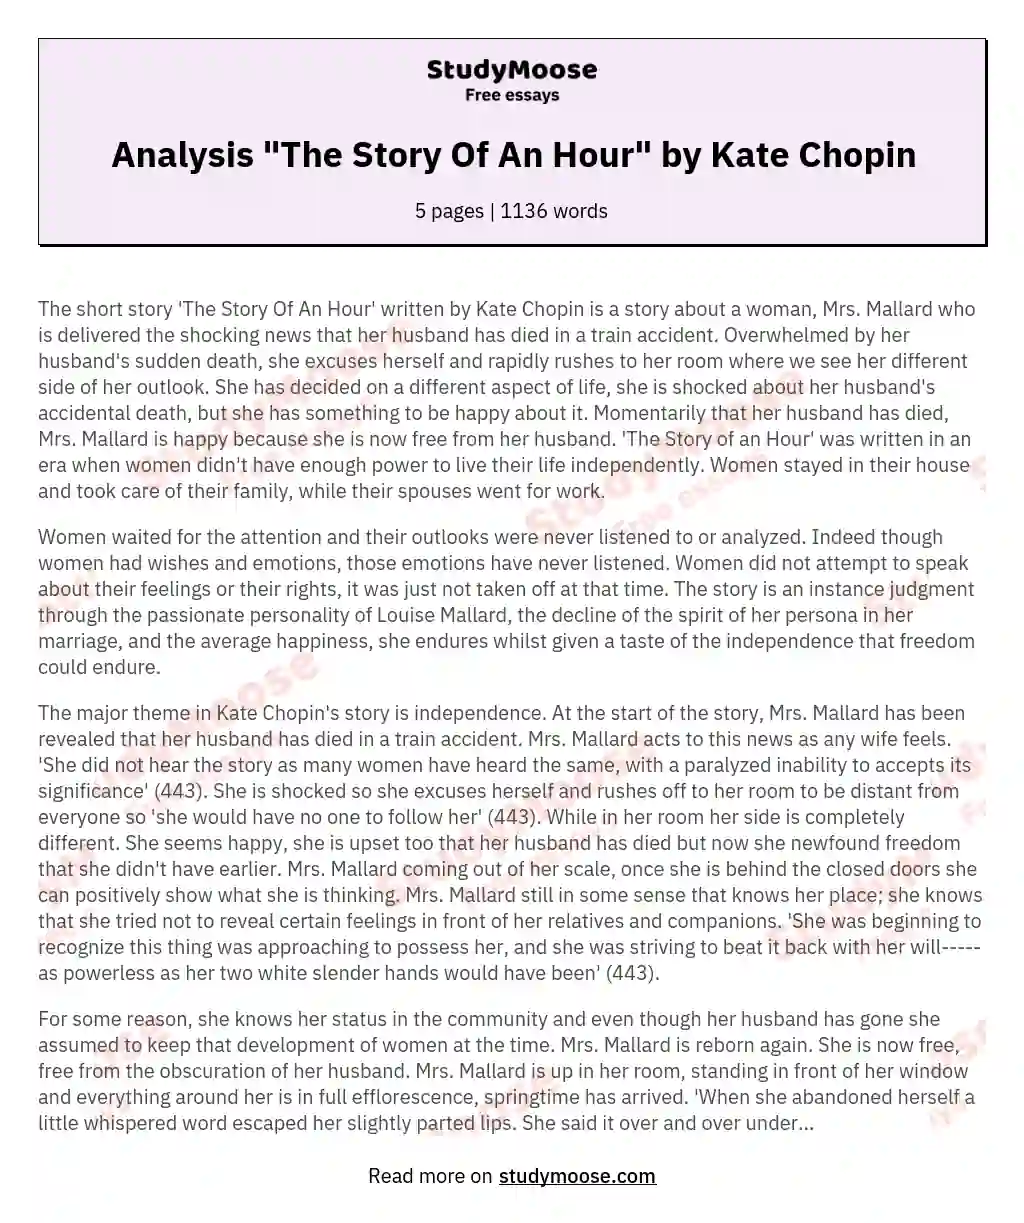 Analysis "The Story Of An Hour" by Kate Chopin